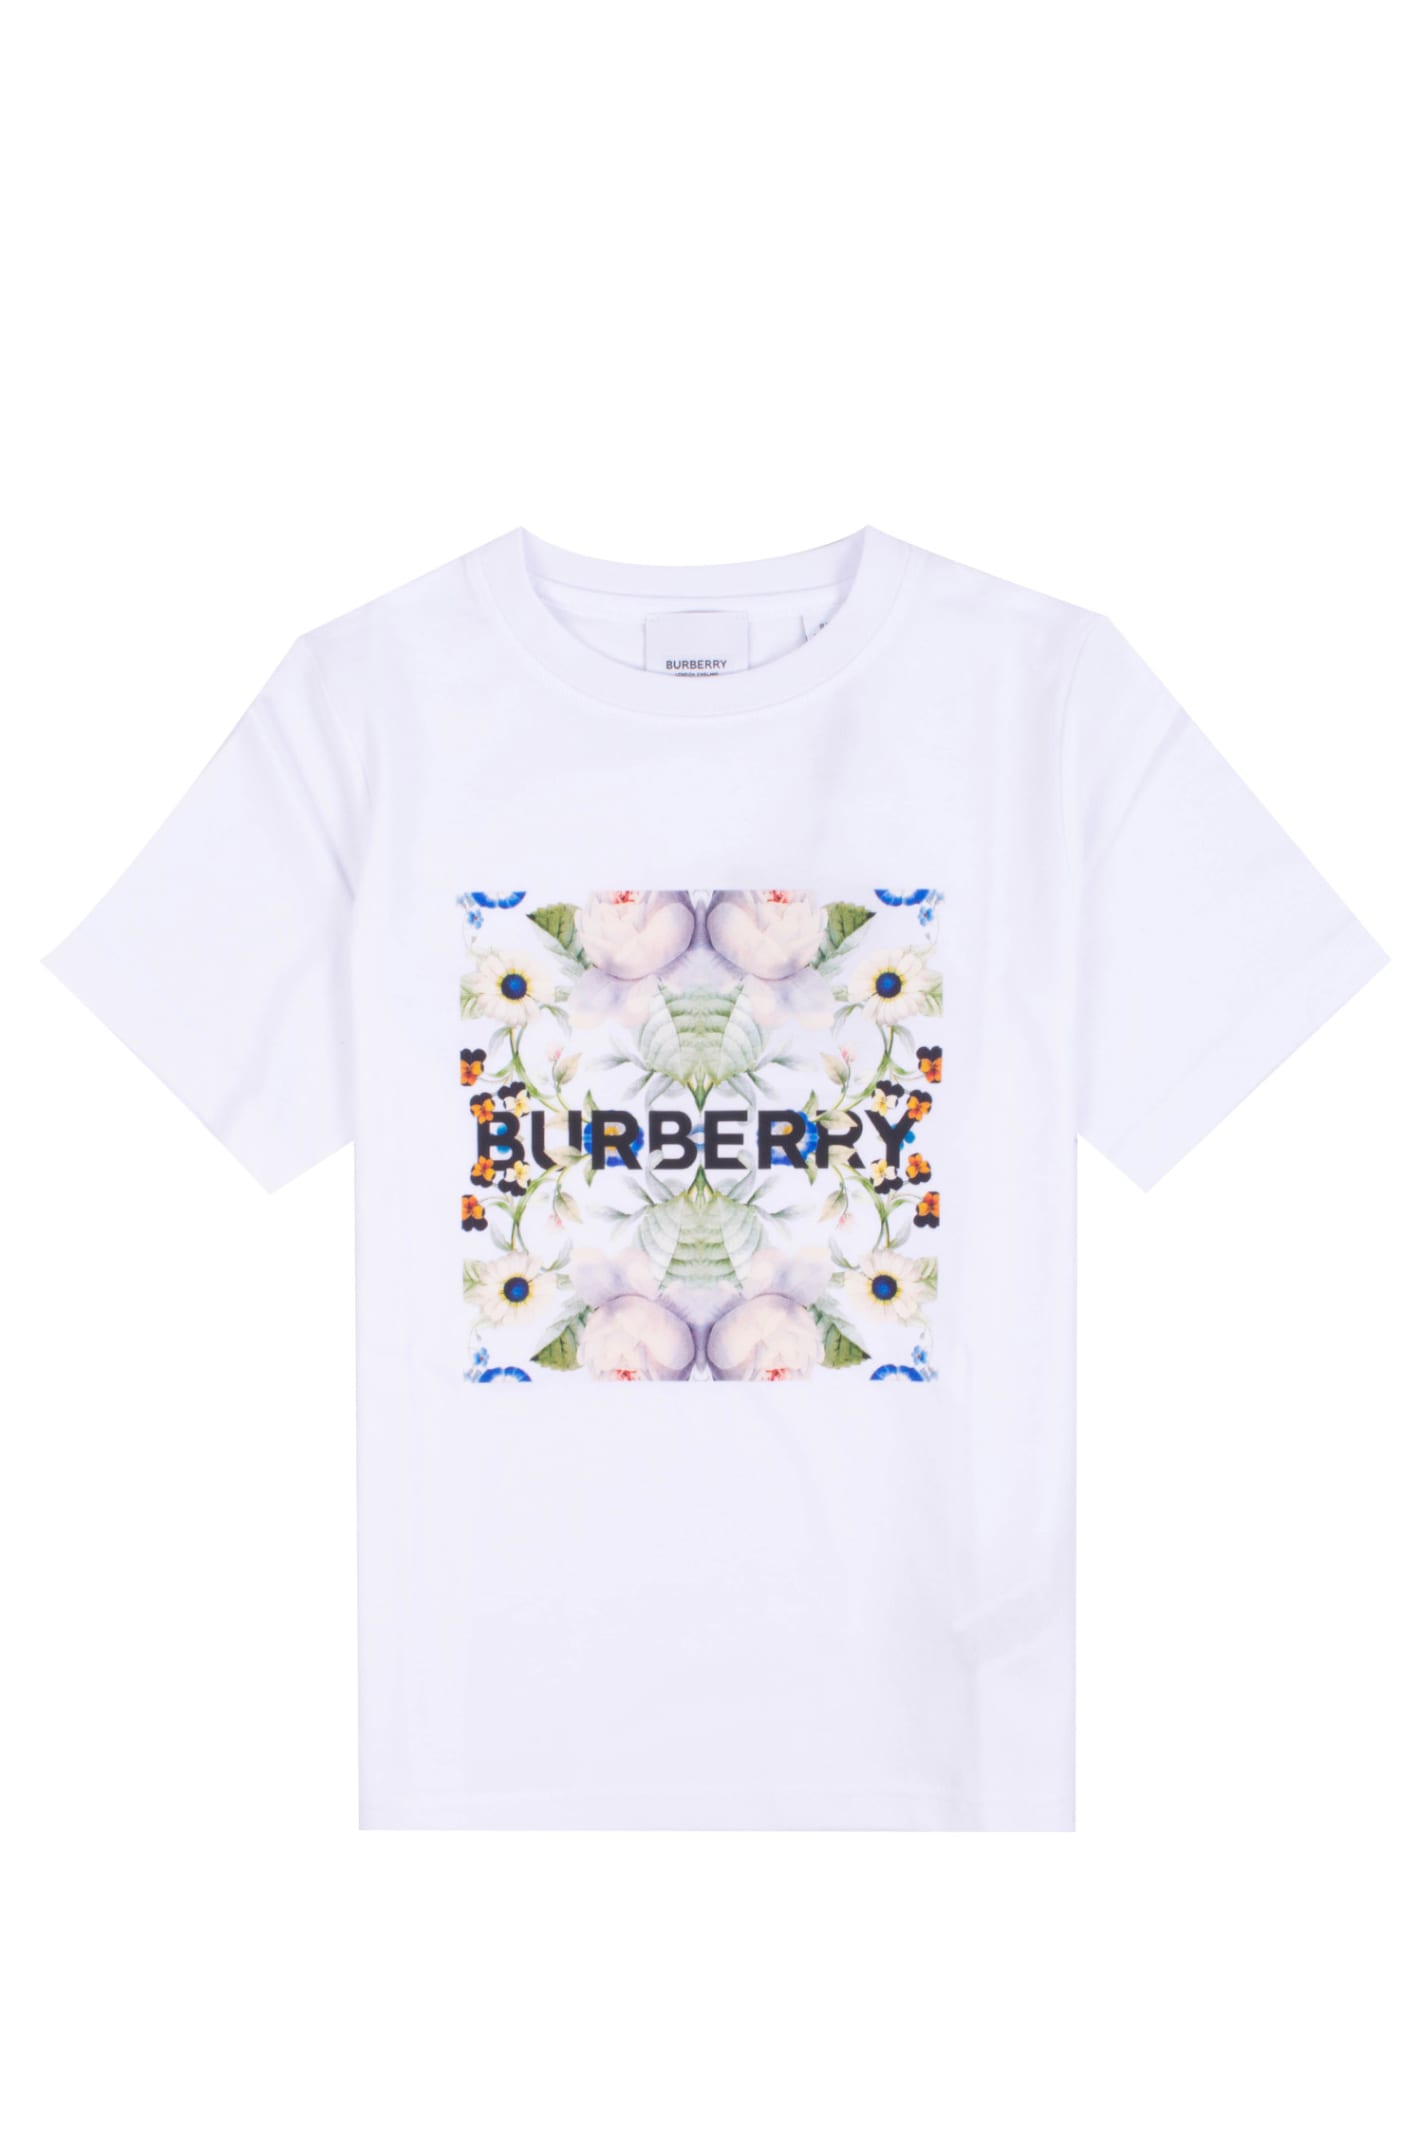 Burberry Cotton T-shirt With Print